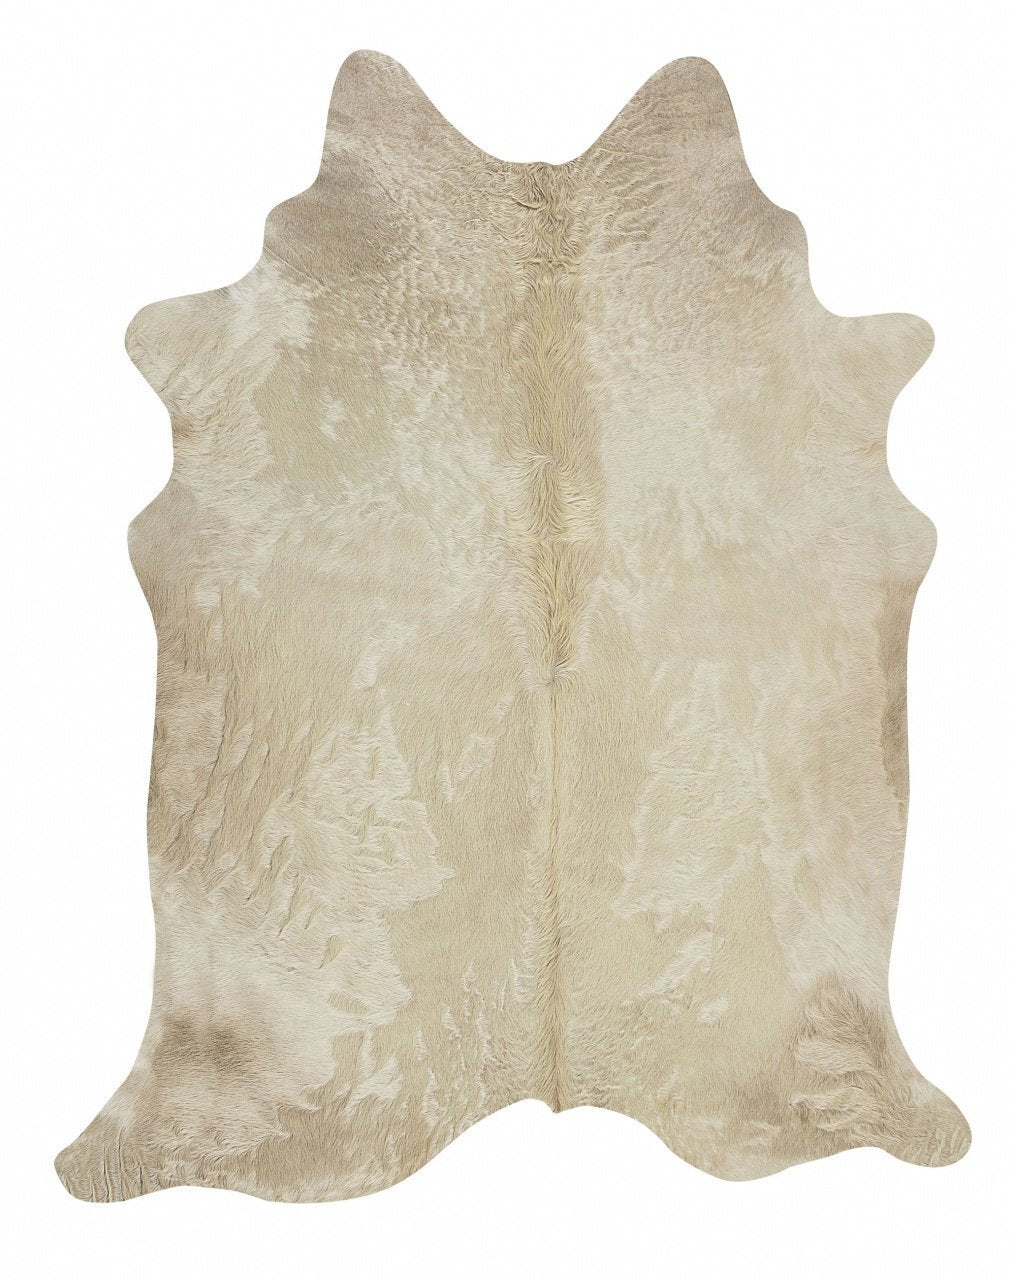 Exquisite Natural Cow Hide Rug Champagne - Newstart Furniture